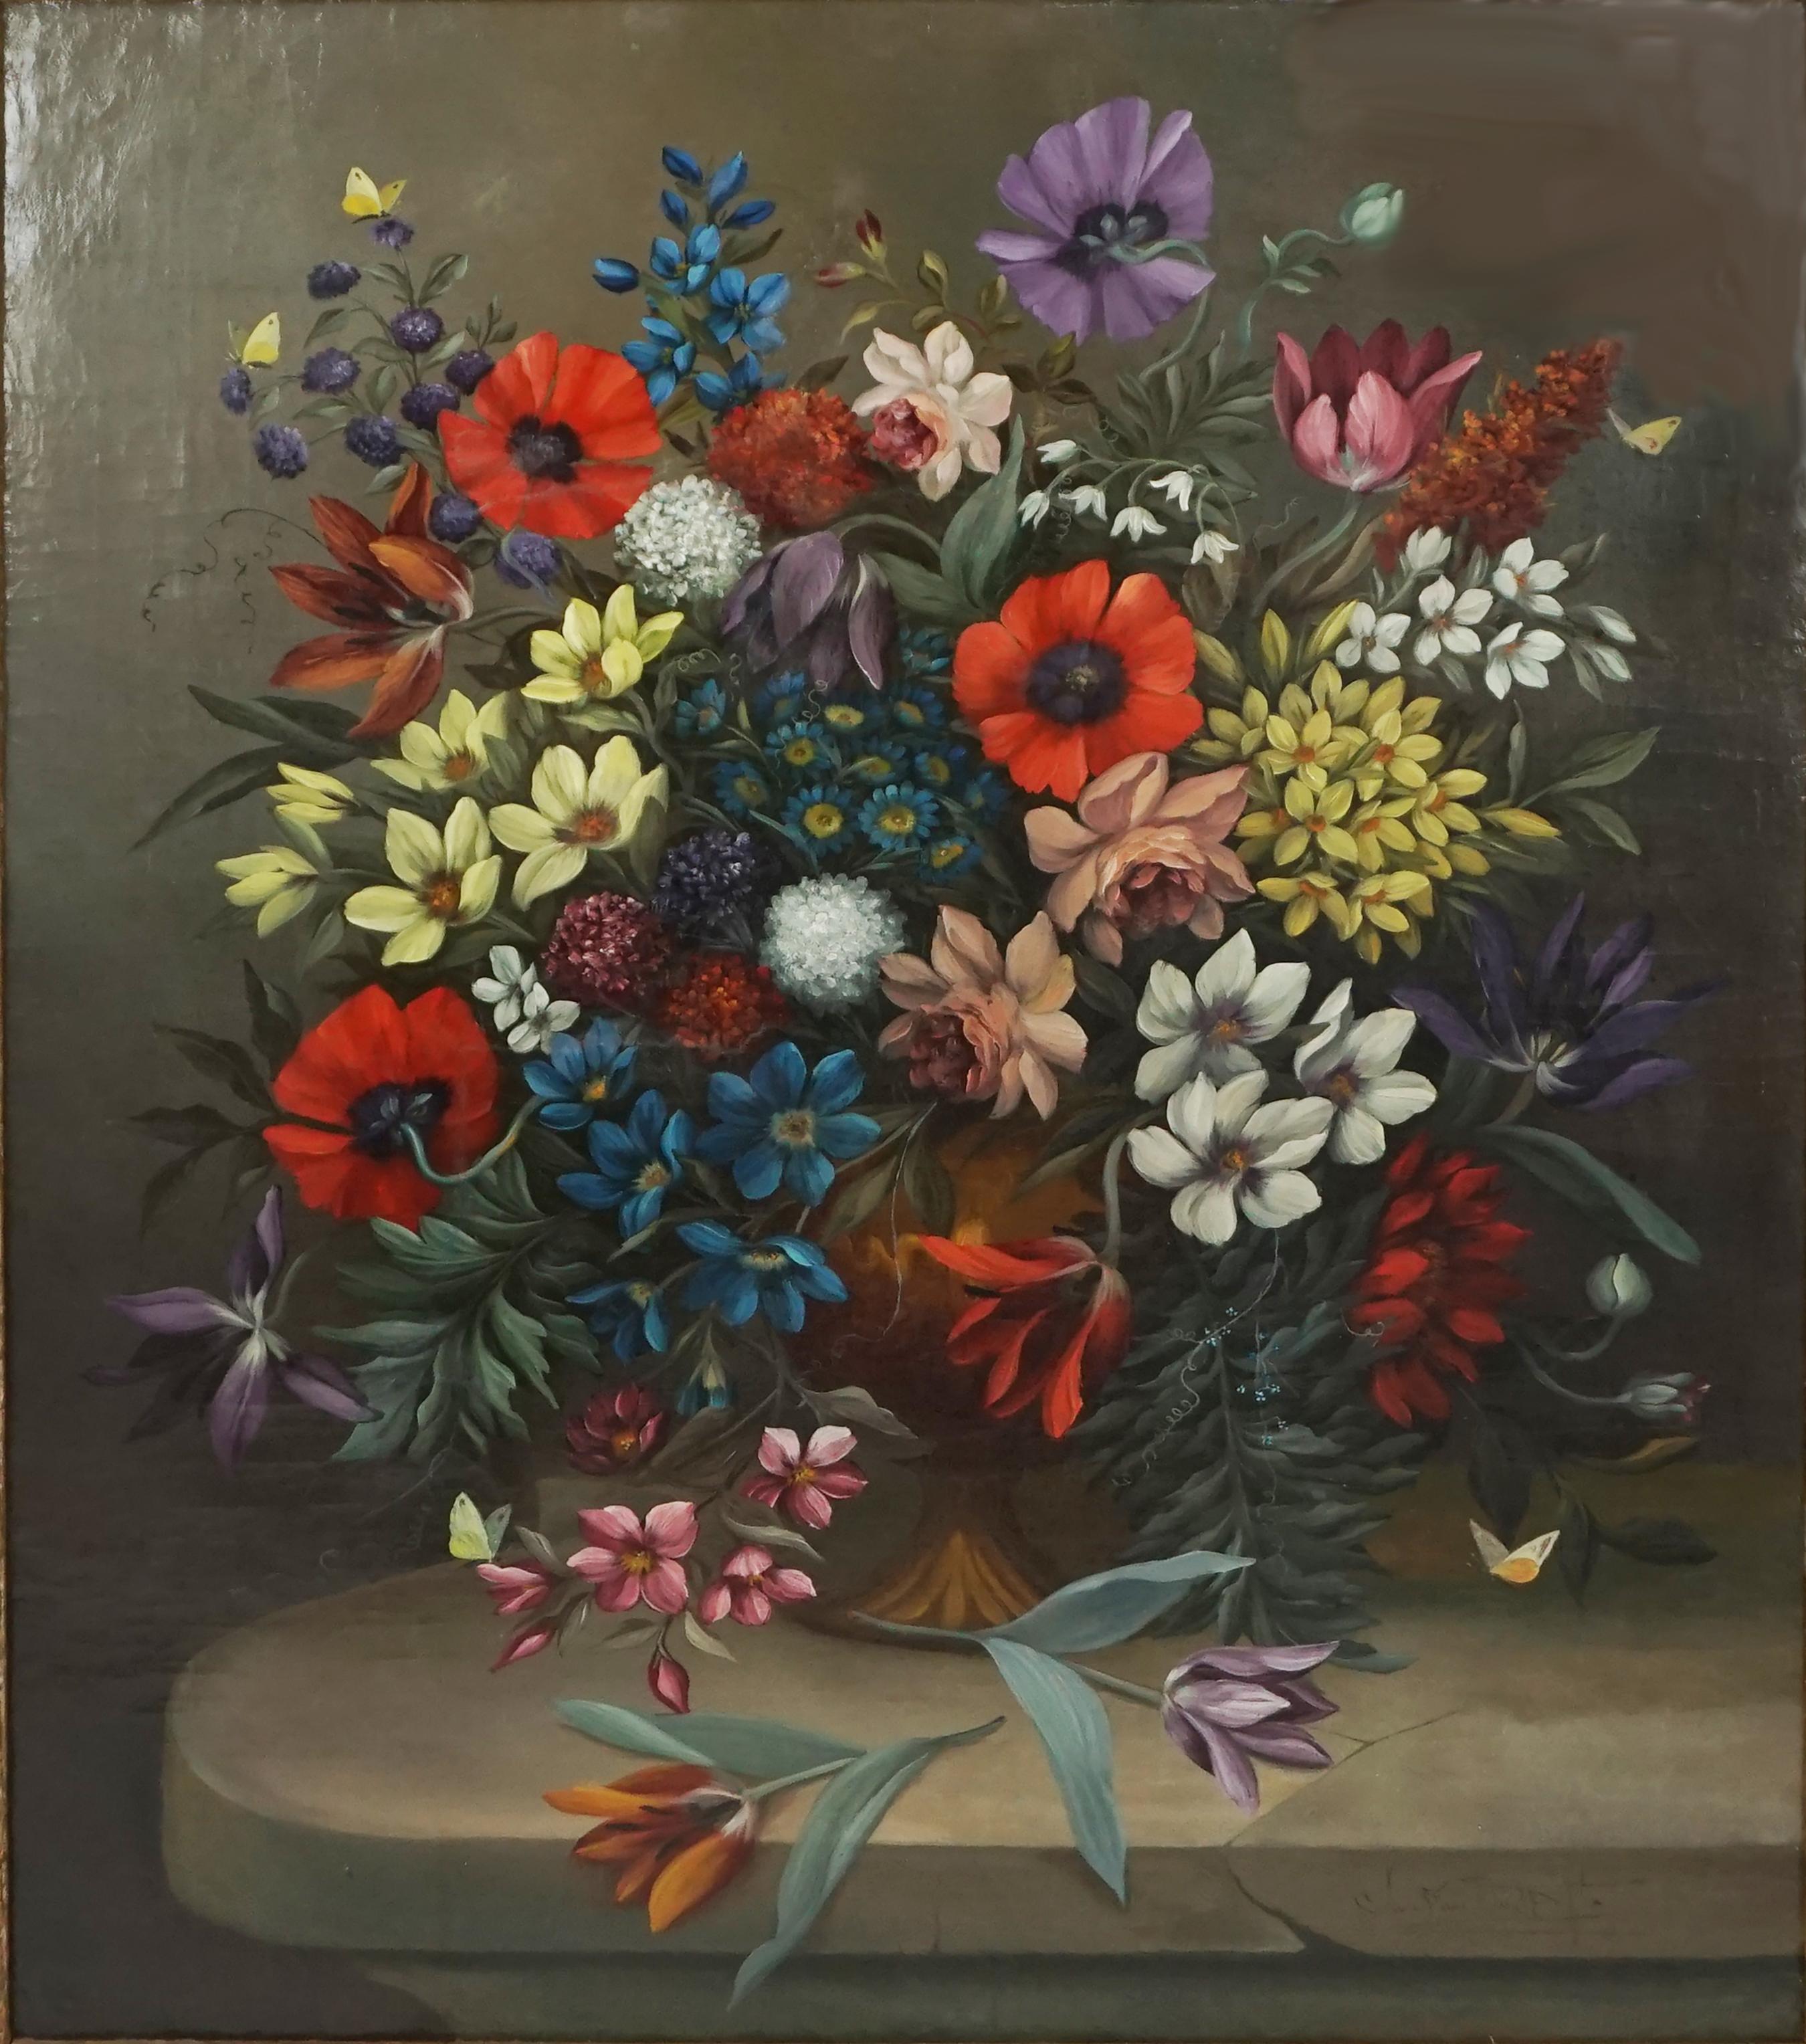 Antique Dutch Floral Still Life with Tulips, Poppies and Butterflies - Painting by Jan Van Doust